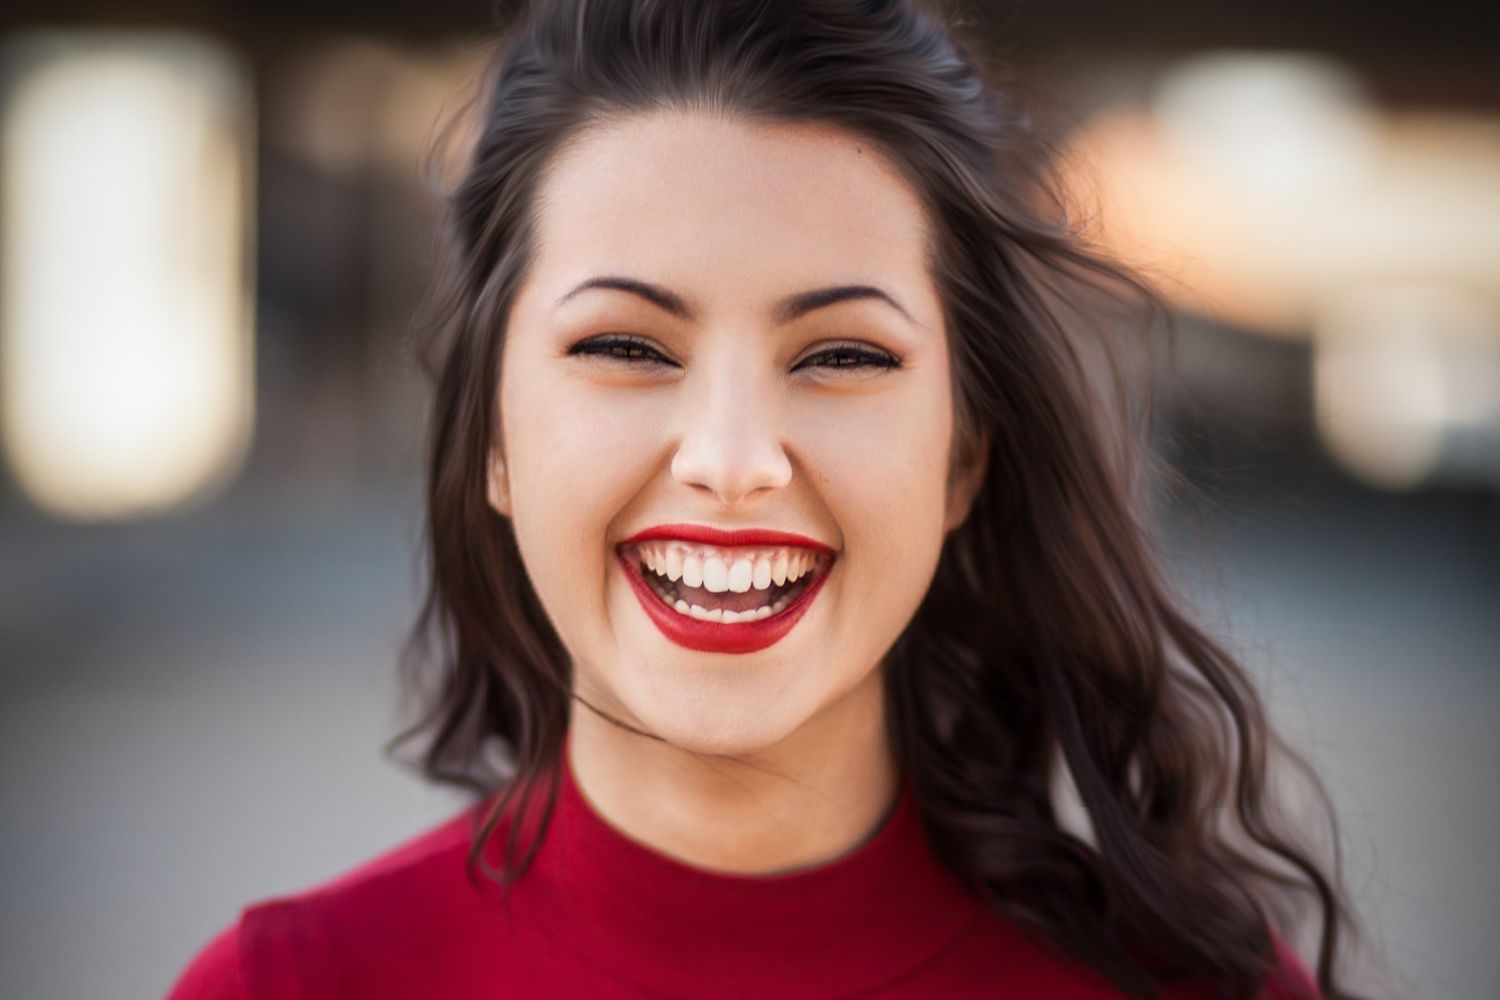 a happily laughing woman with white teeth Photo by Michael Dam on Unsplash